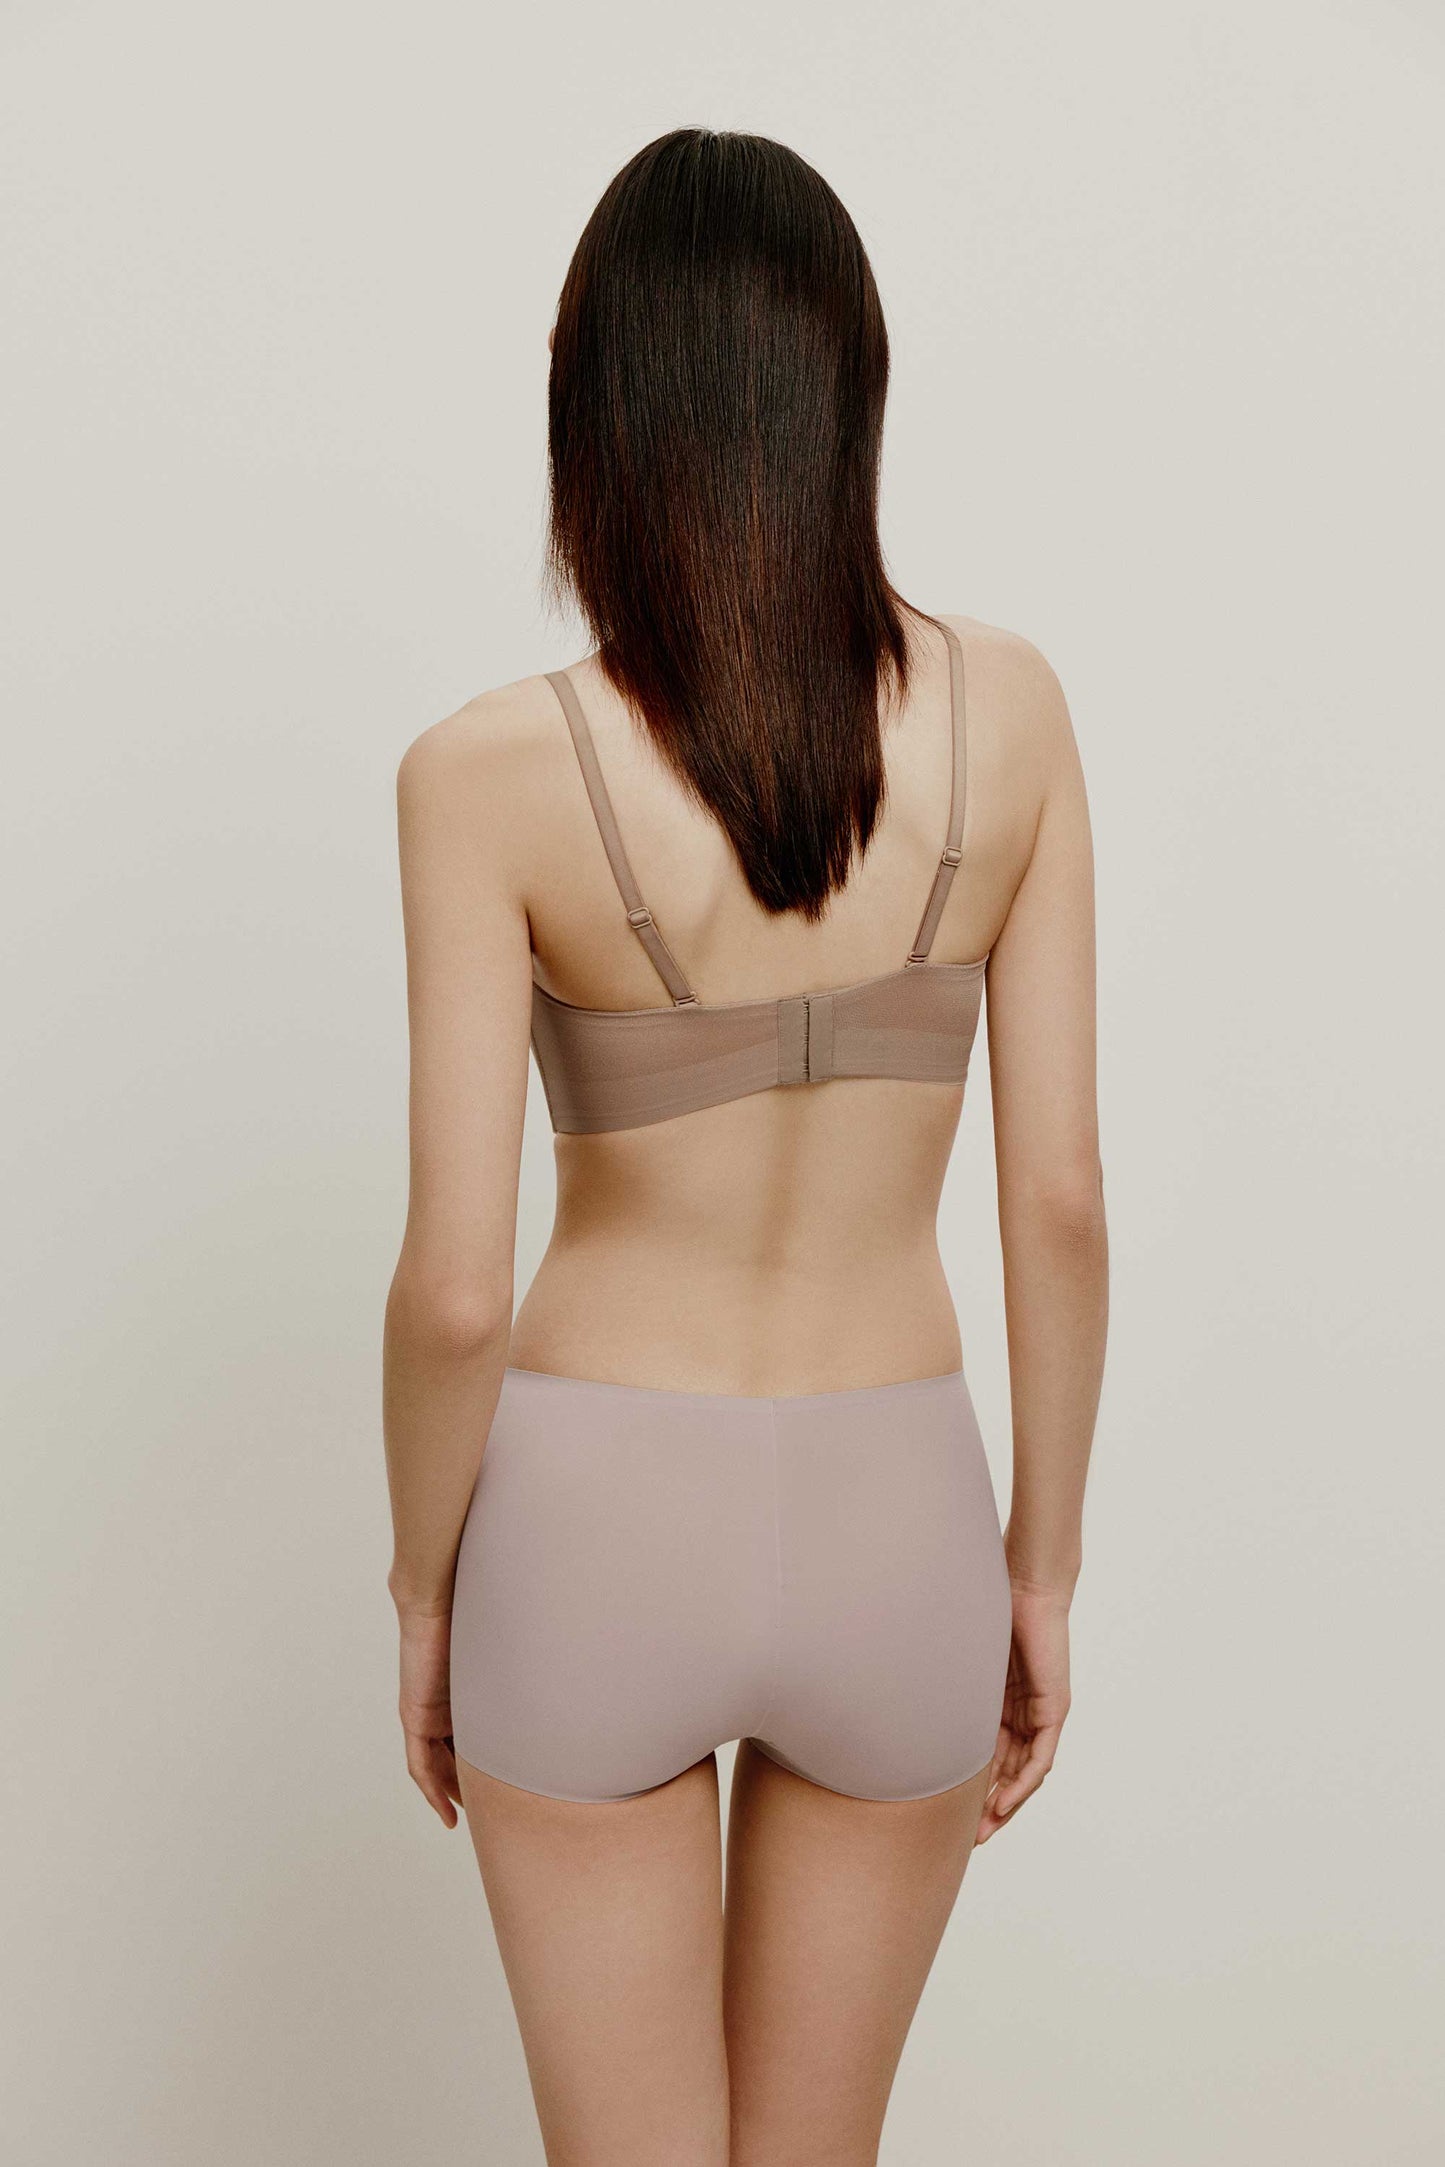 back of woman in tan color bra and light purple brief